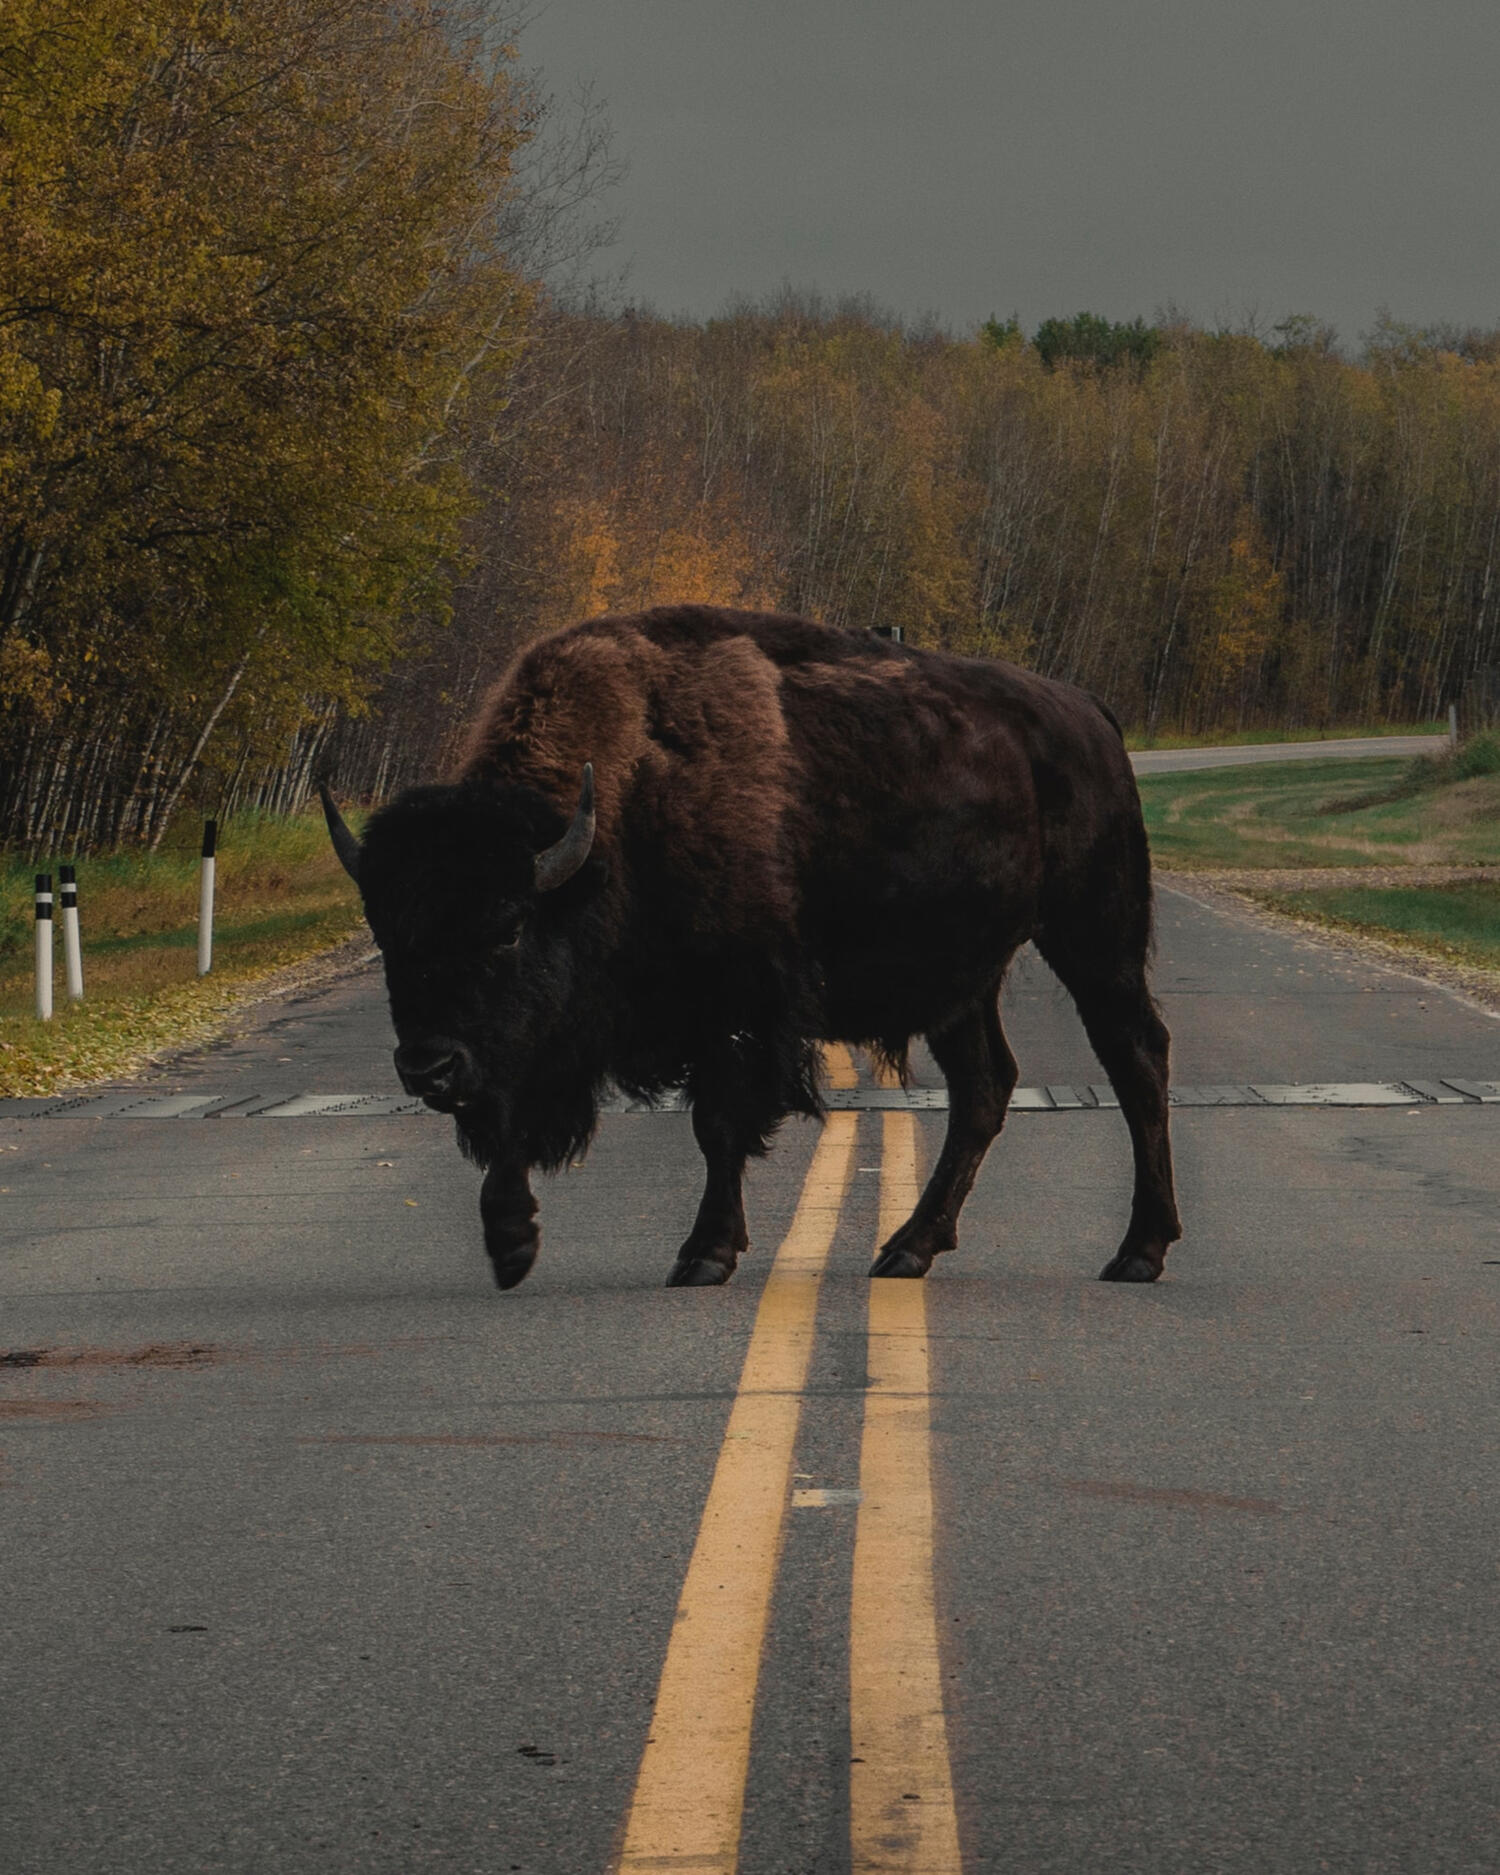 Bison in the centre of a dual carriageway facing the camera